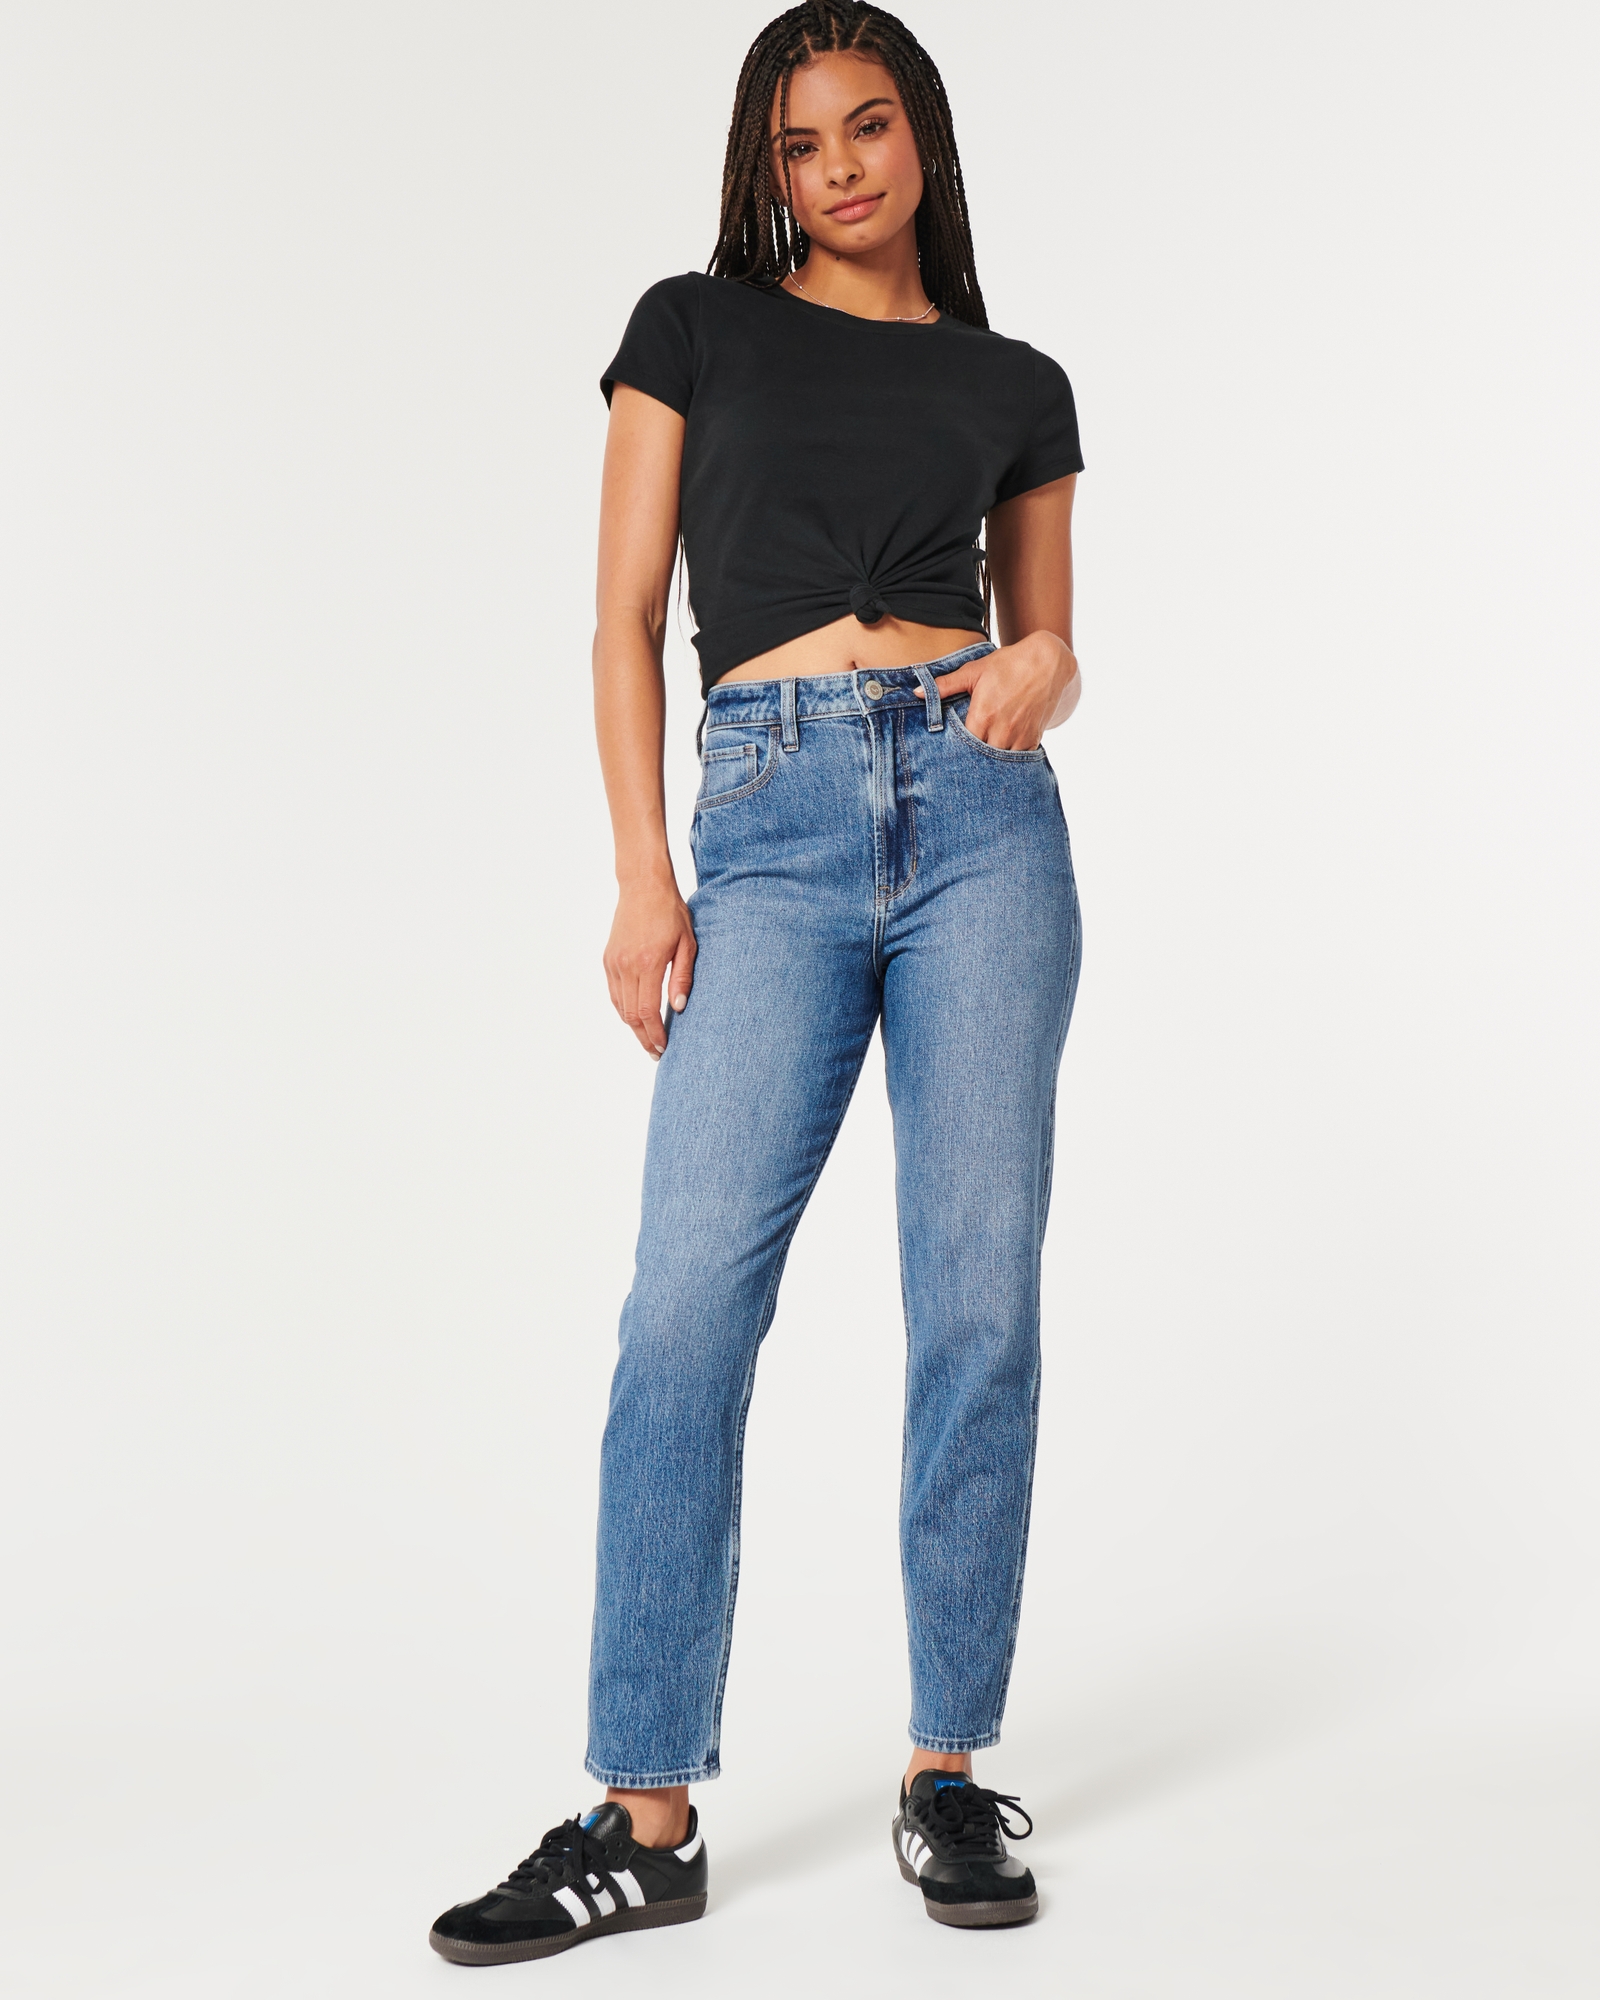 Hollister California Women's Vintage Stretch Ultra High-Rise Mom Jeans  HOW-50 (00 Regular, 6329-278) at  Women's Jeans store